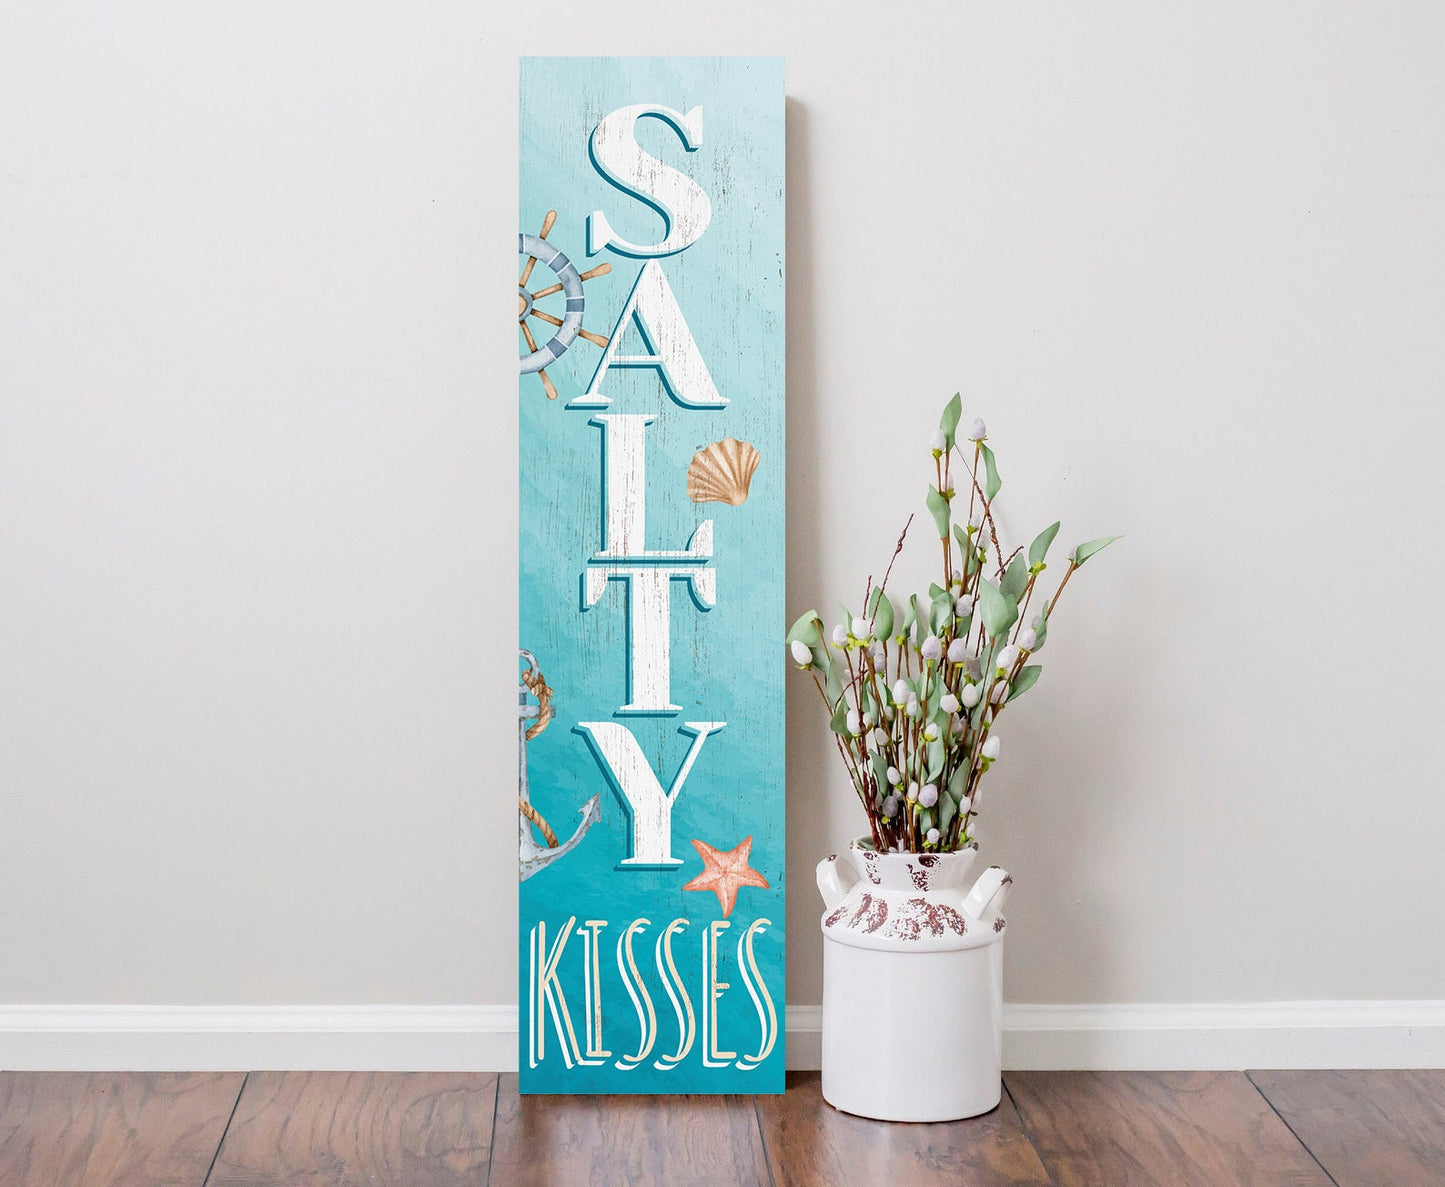 36in Salty Kisses Porch Sign for Front Door - Tropical Wooden Wall Decor, Outdoor Summer Beach Inspired Display